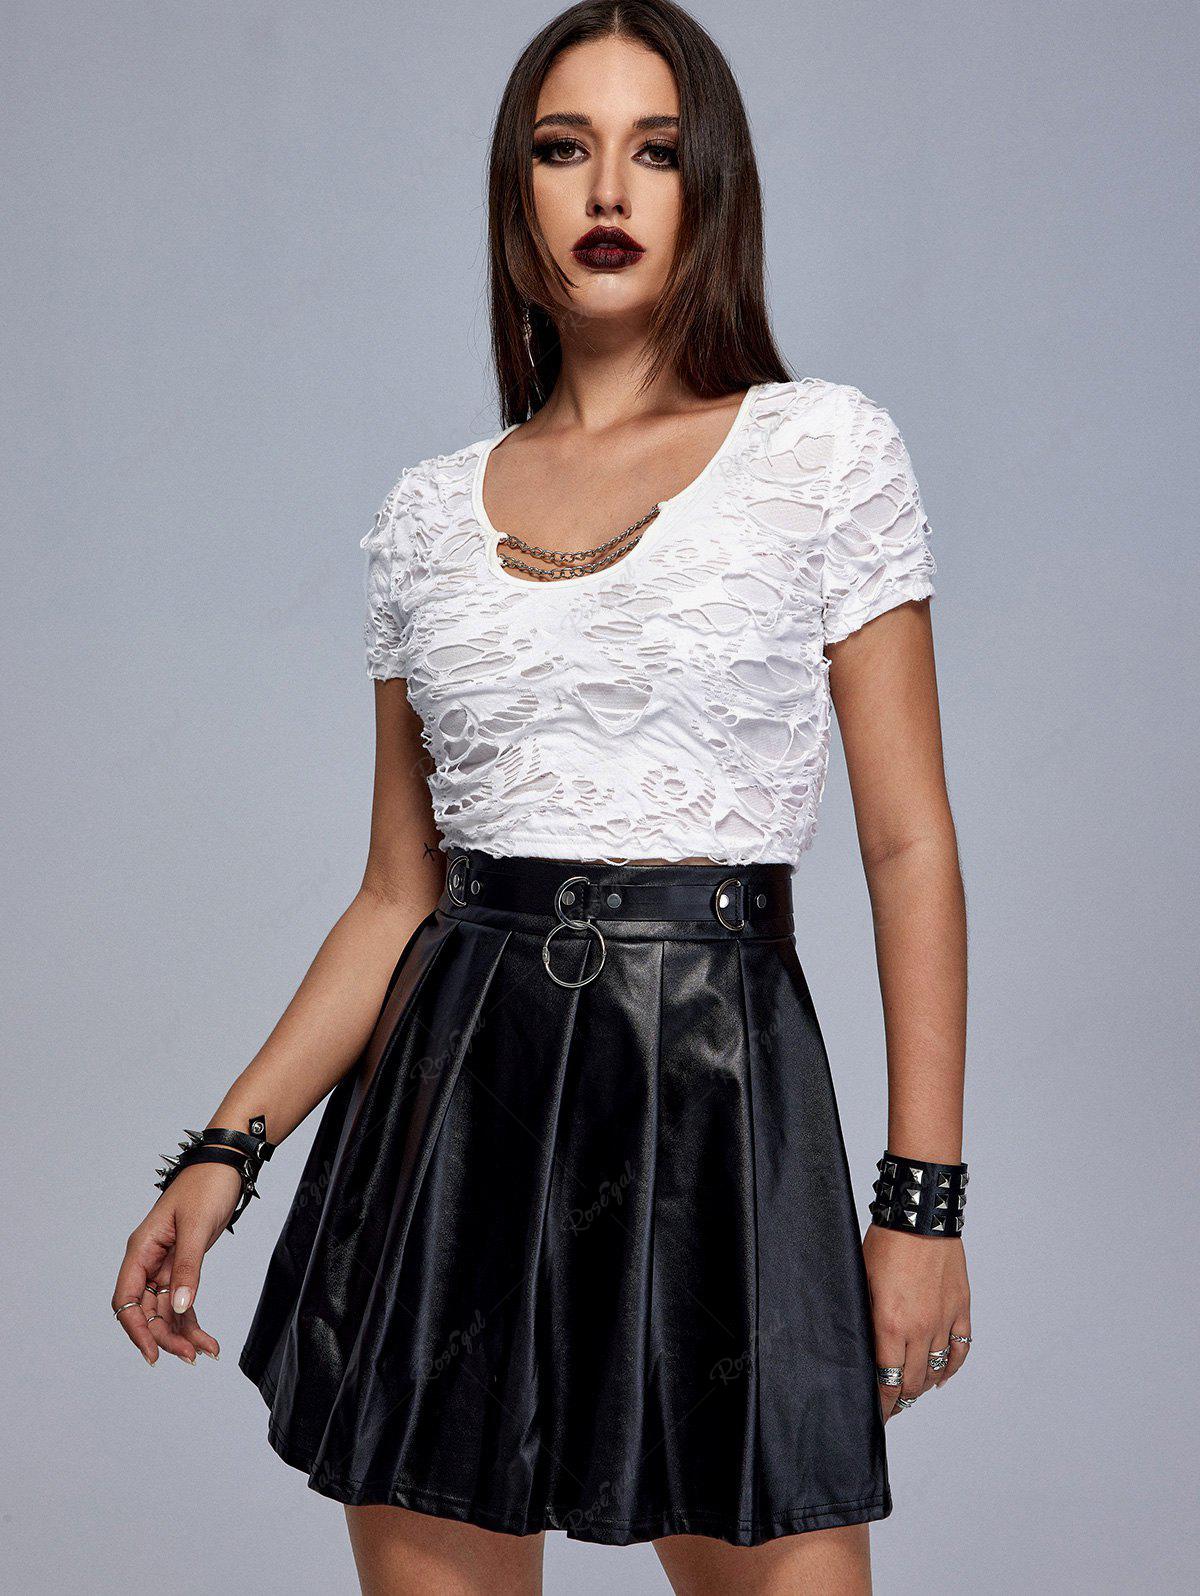 💗Ginny Loves💗 Gothic Ripped Chain Embellish Cutout Crop Top